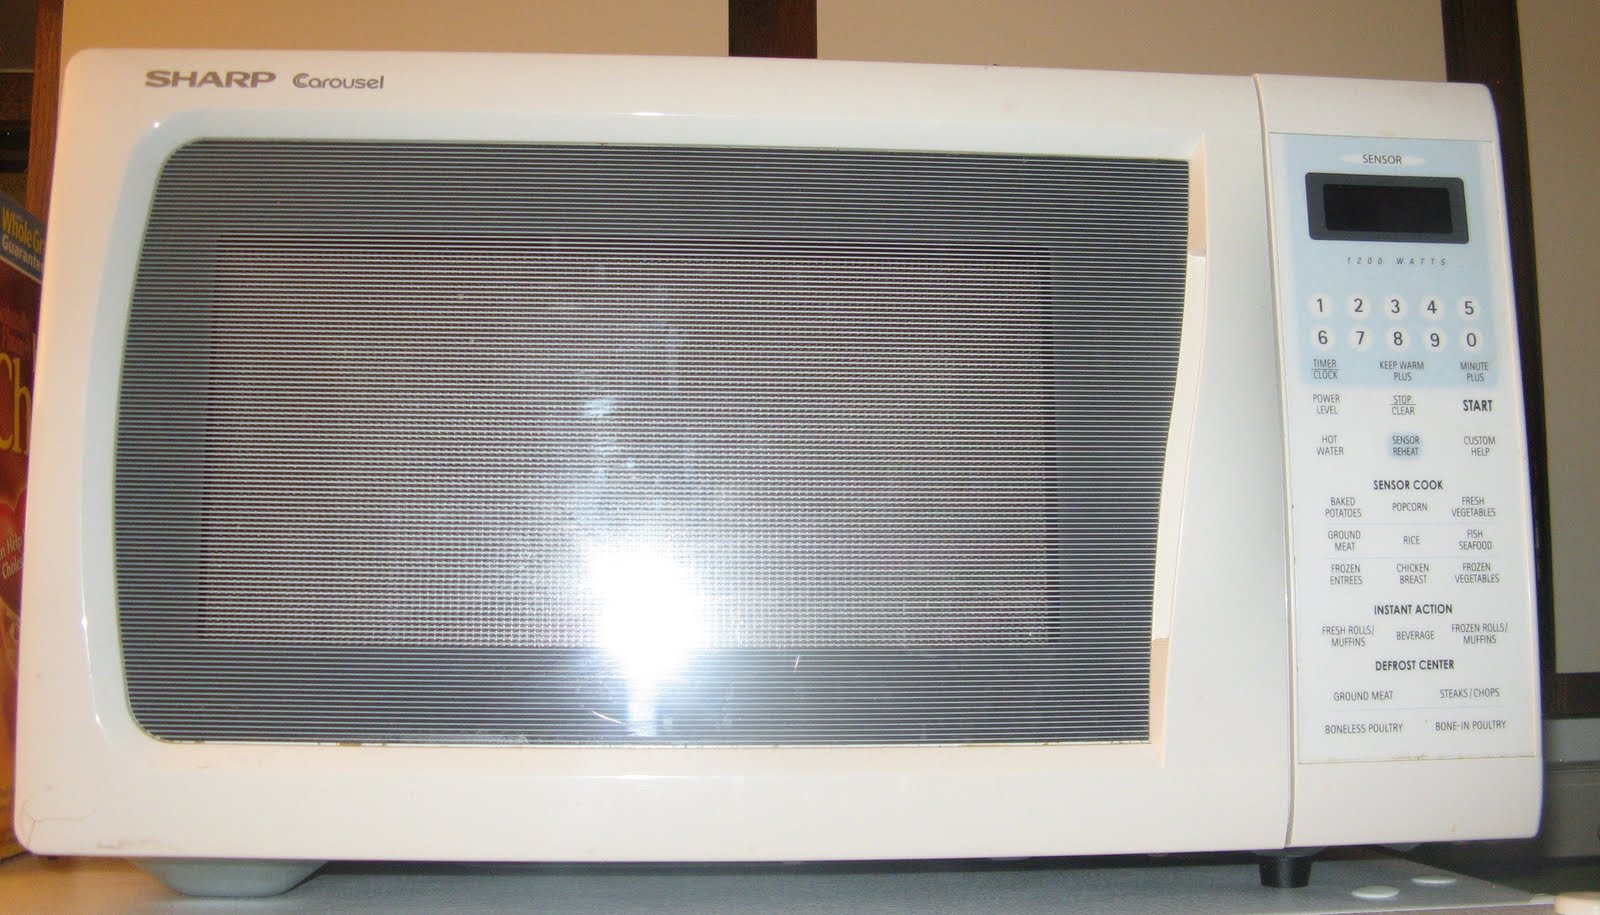 Moving Sale: Sharp microwave (clock doesn't work) $15